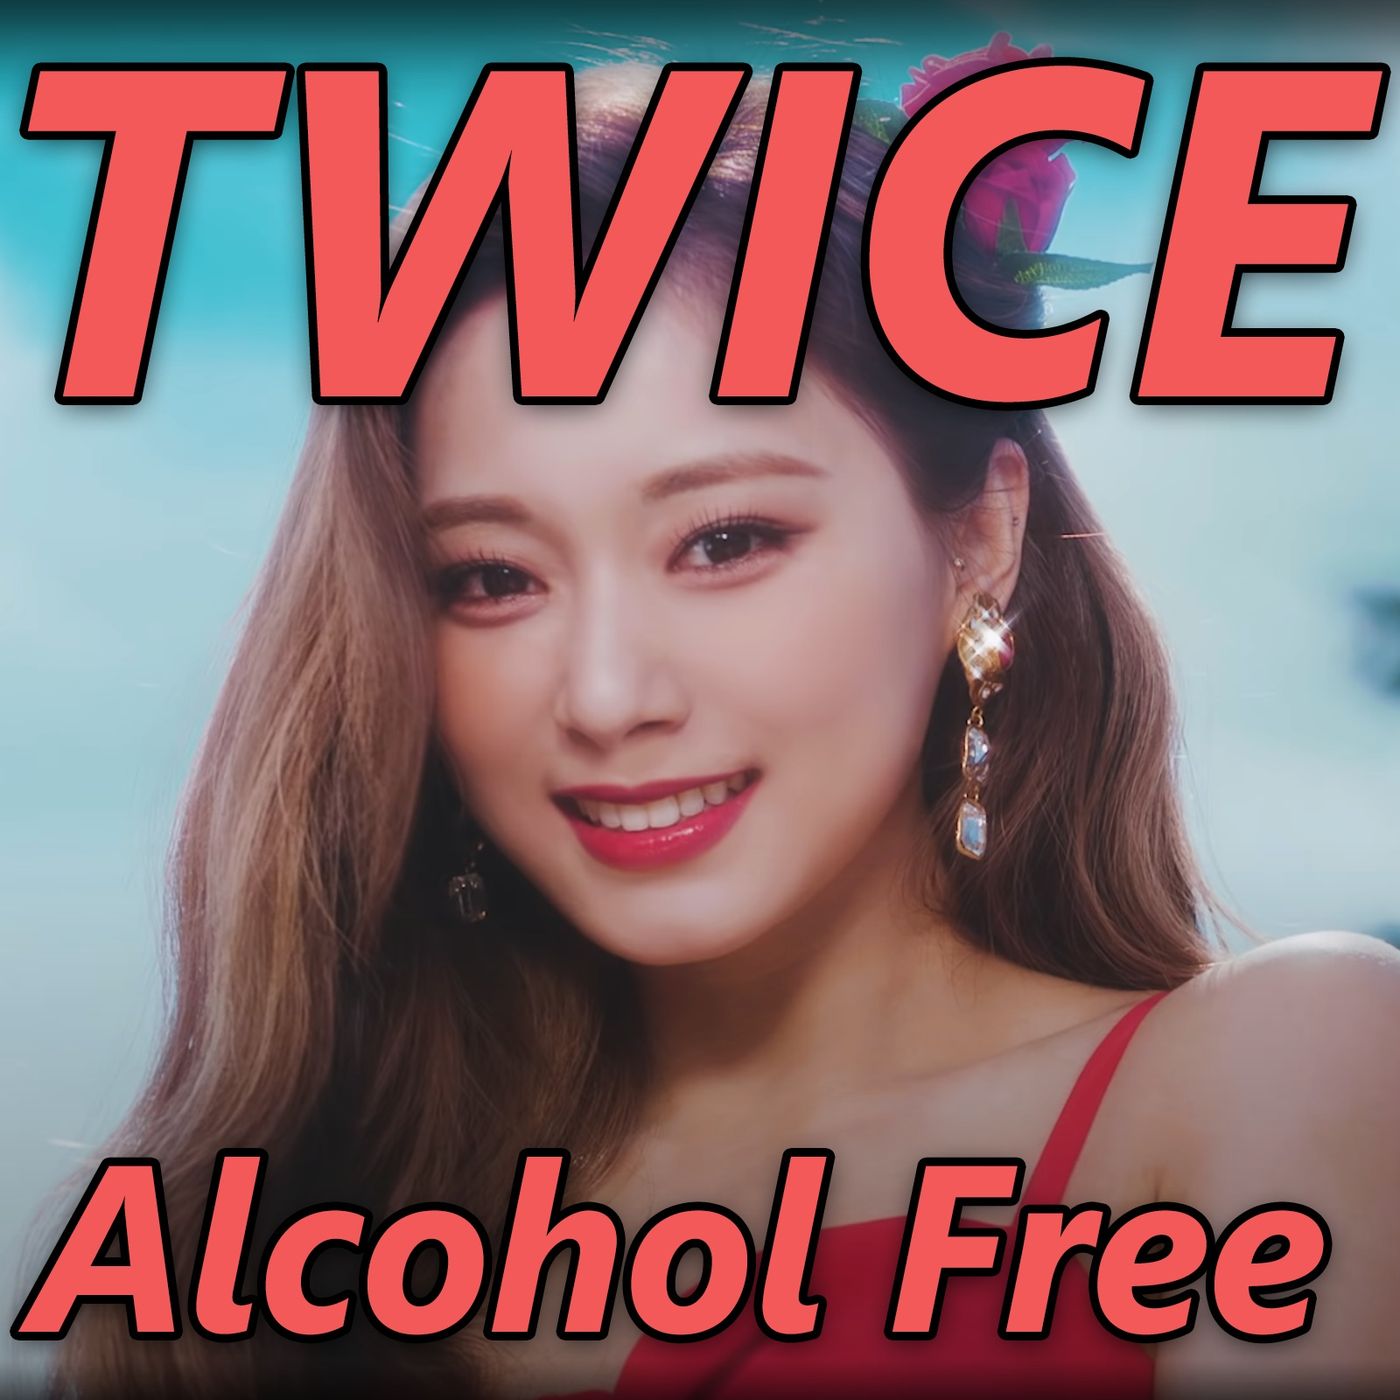 TWICE’s ”Alcohol-Free” is Actually Avant-Garde